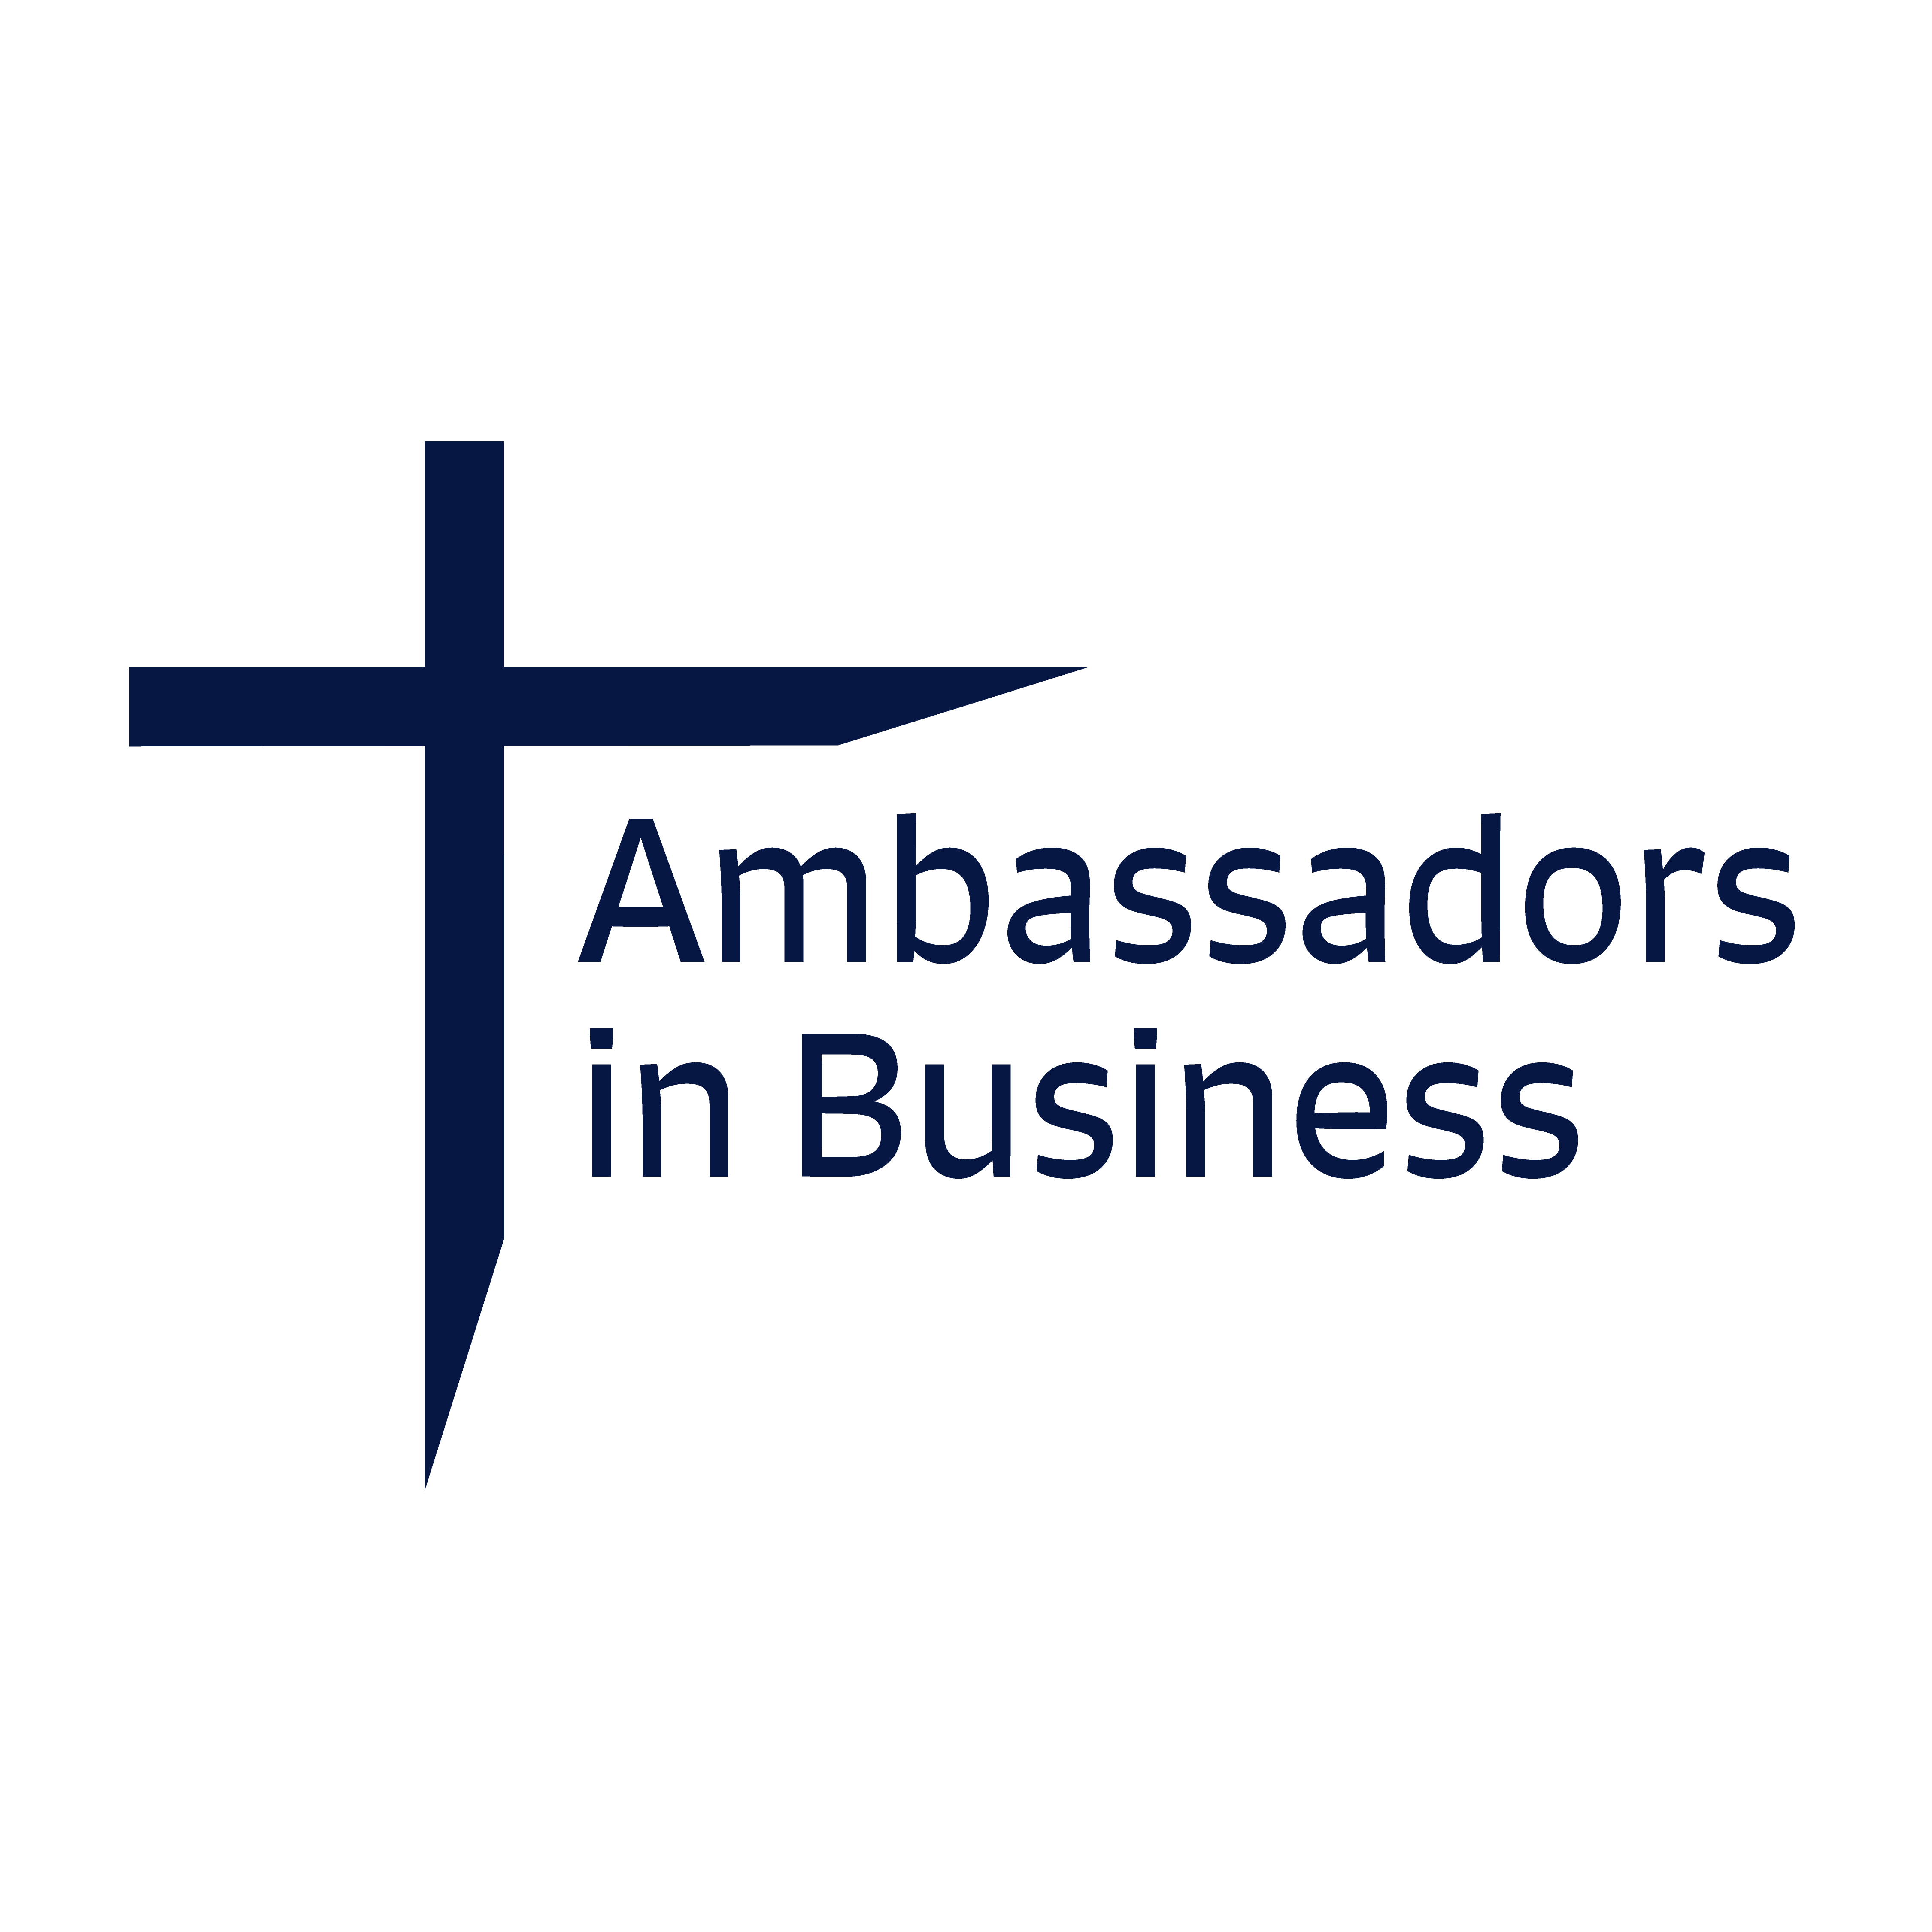 Ambassadors in Business